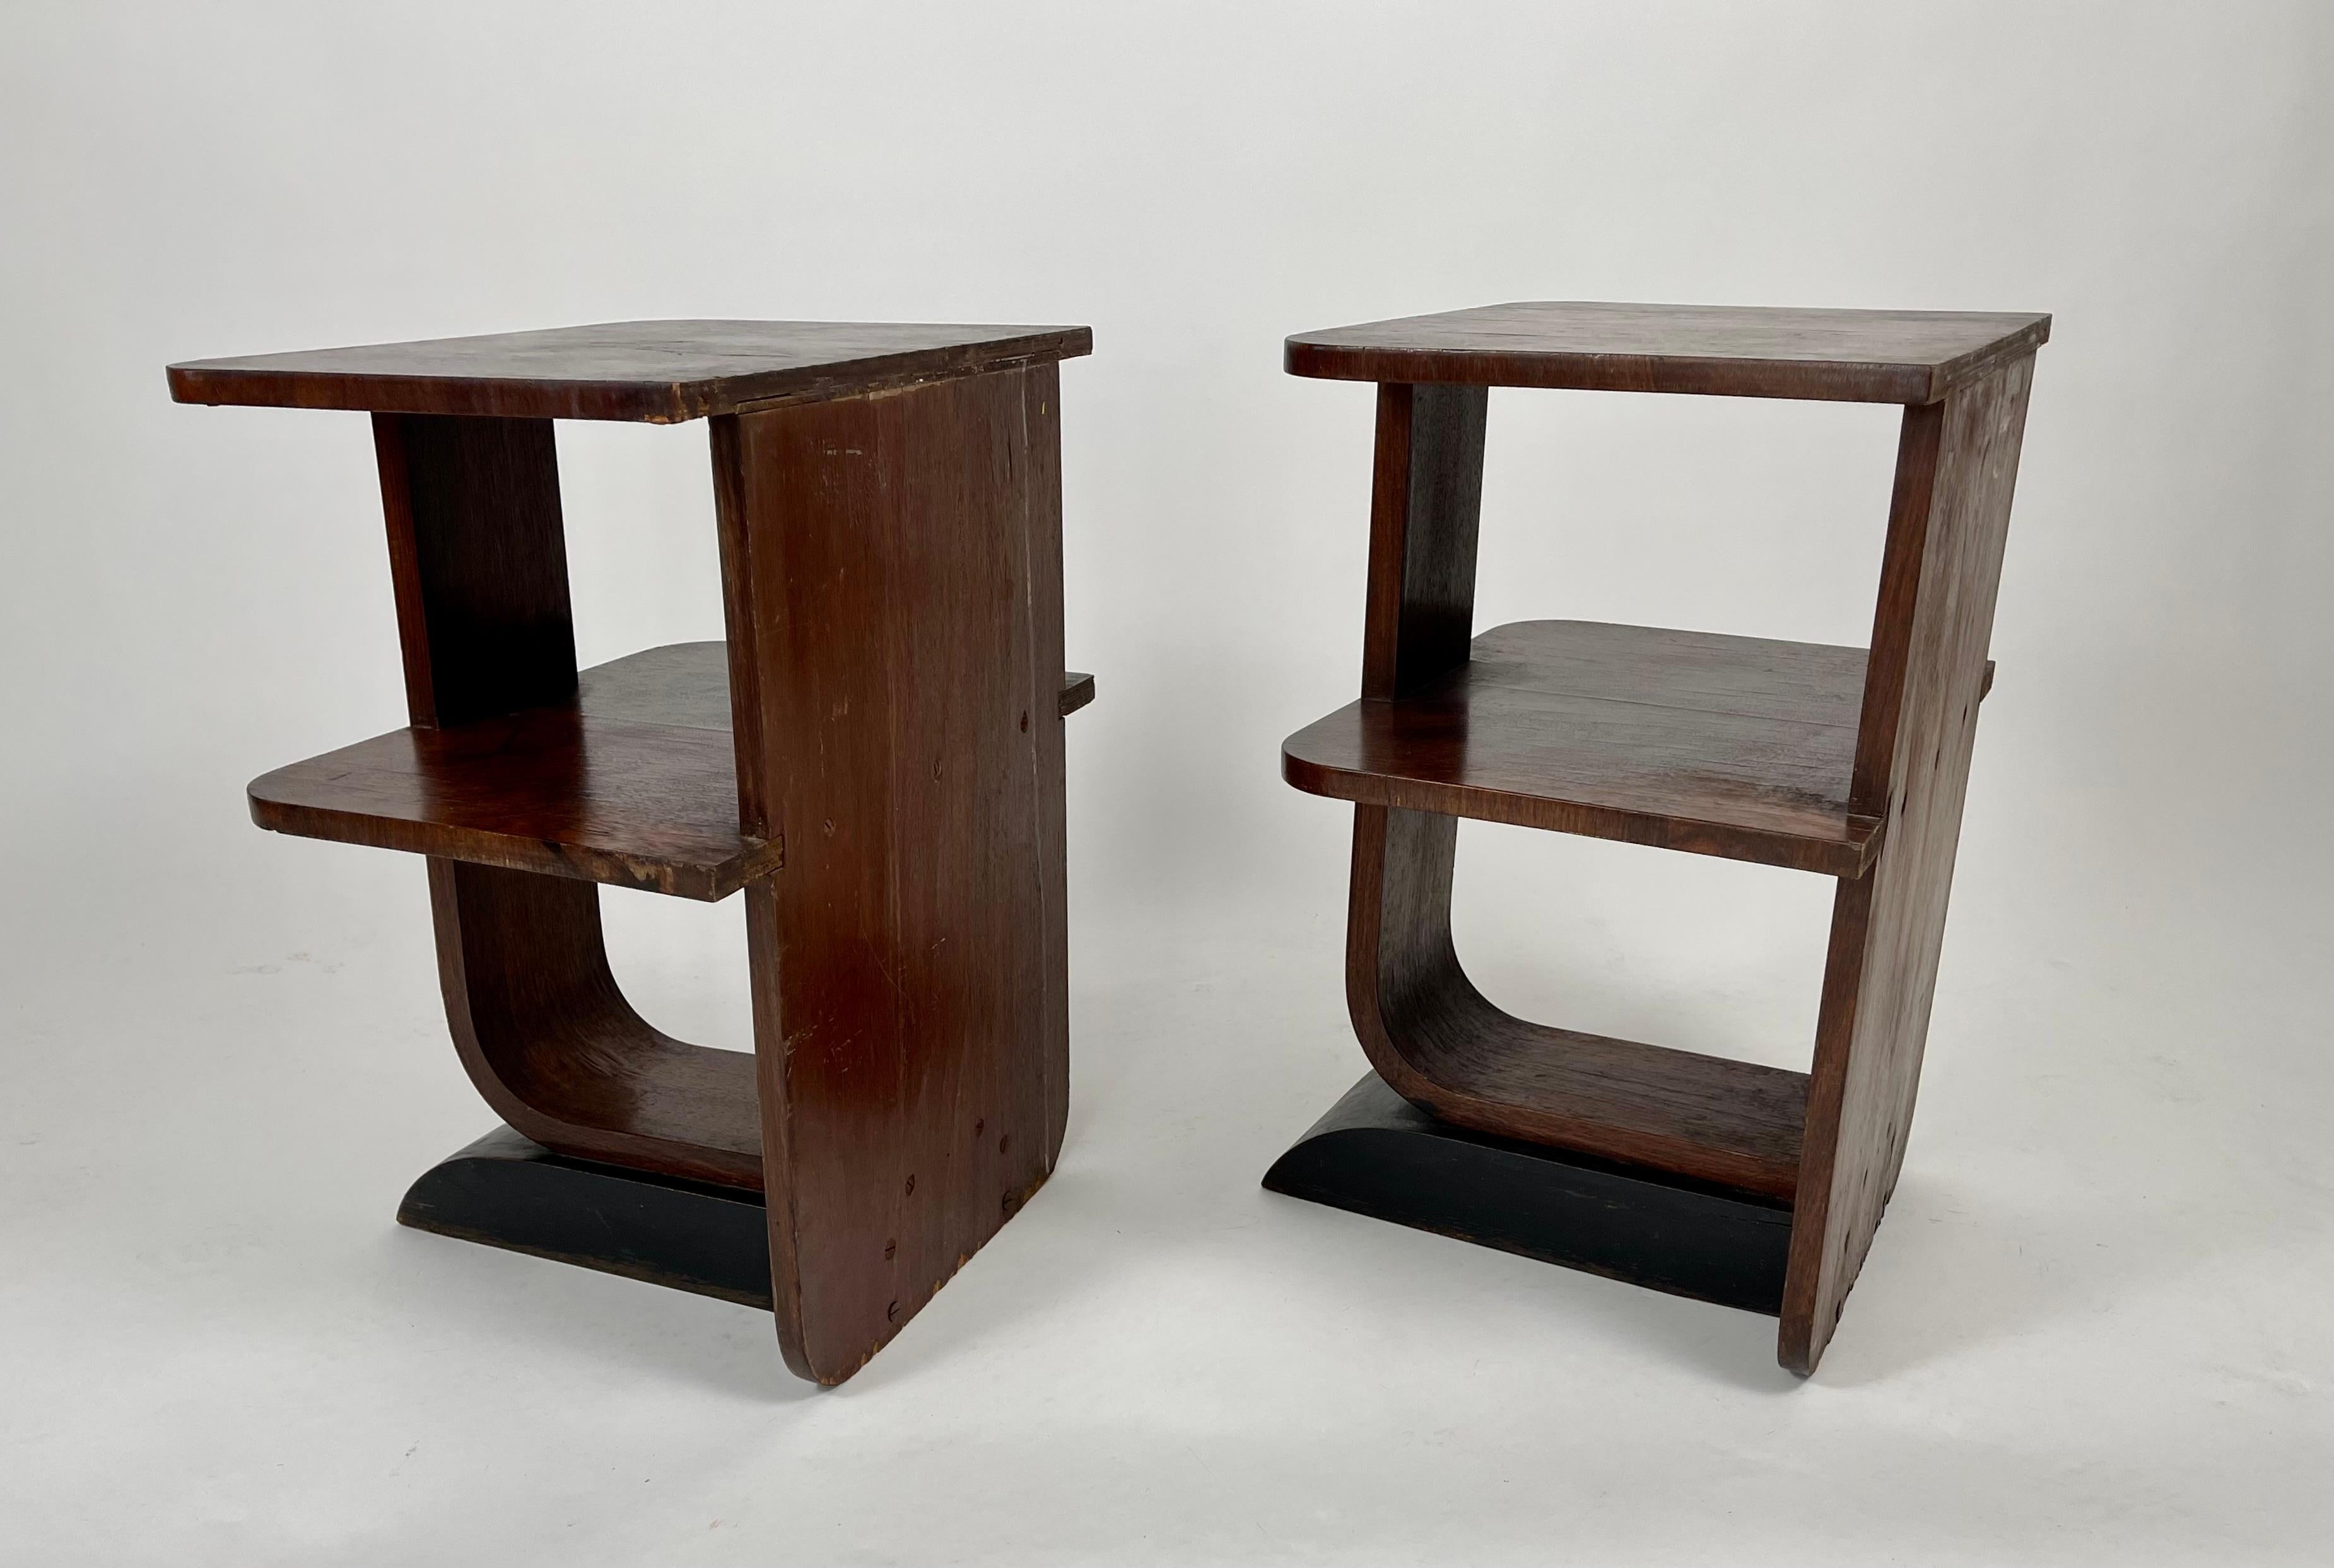 Early 20th Century Pair of Small Art Deco End Tables with Shelves